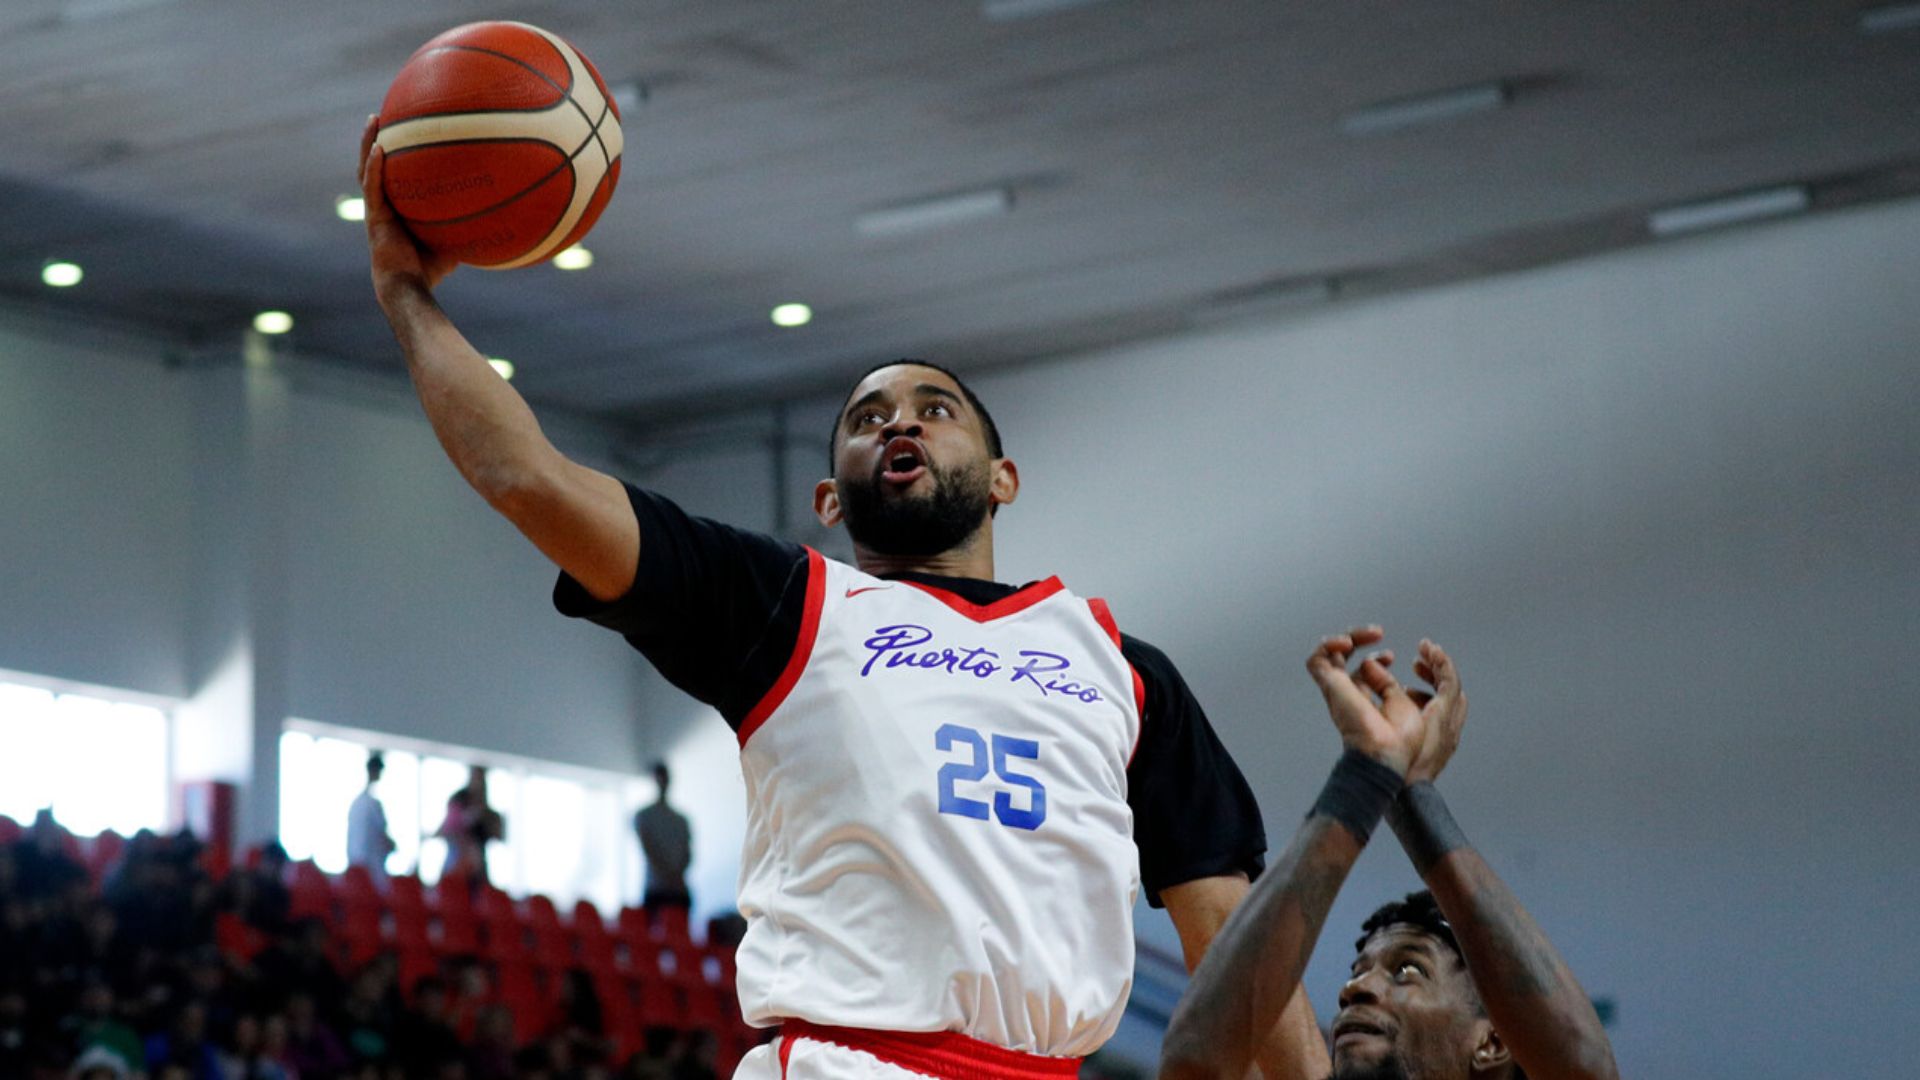 Male’s Basketball: Puerto Rico dominates Panama and claims the seventh place